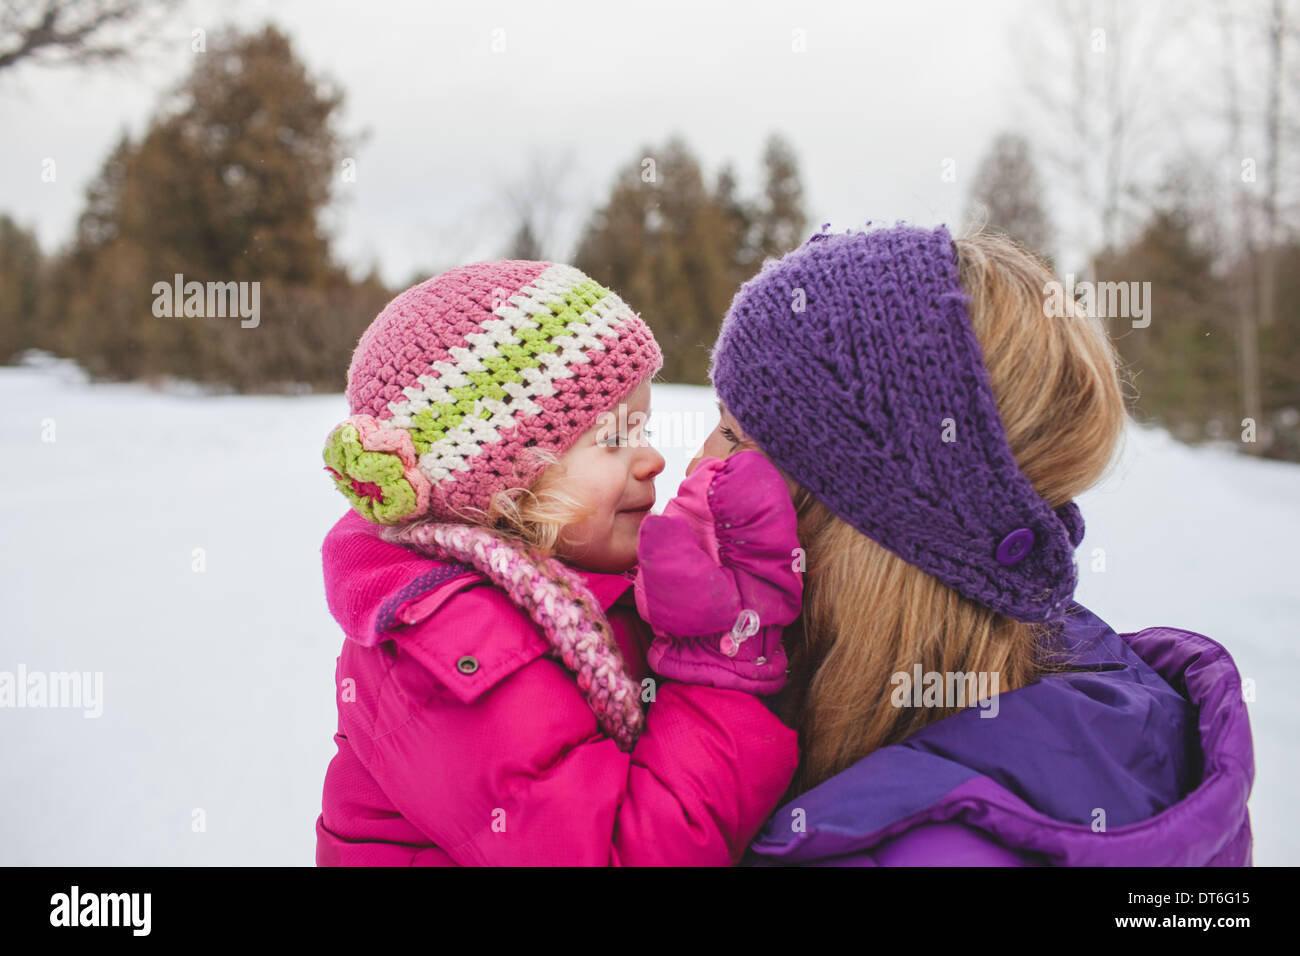 Mother and daughter wearing winter clothing, face to face in snow Stock Photo